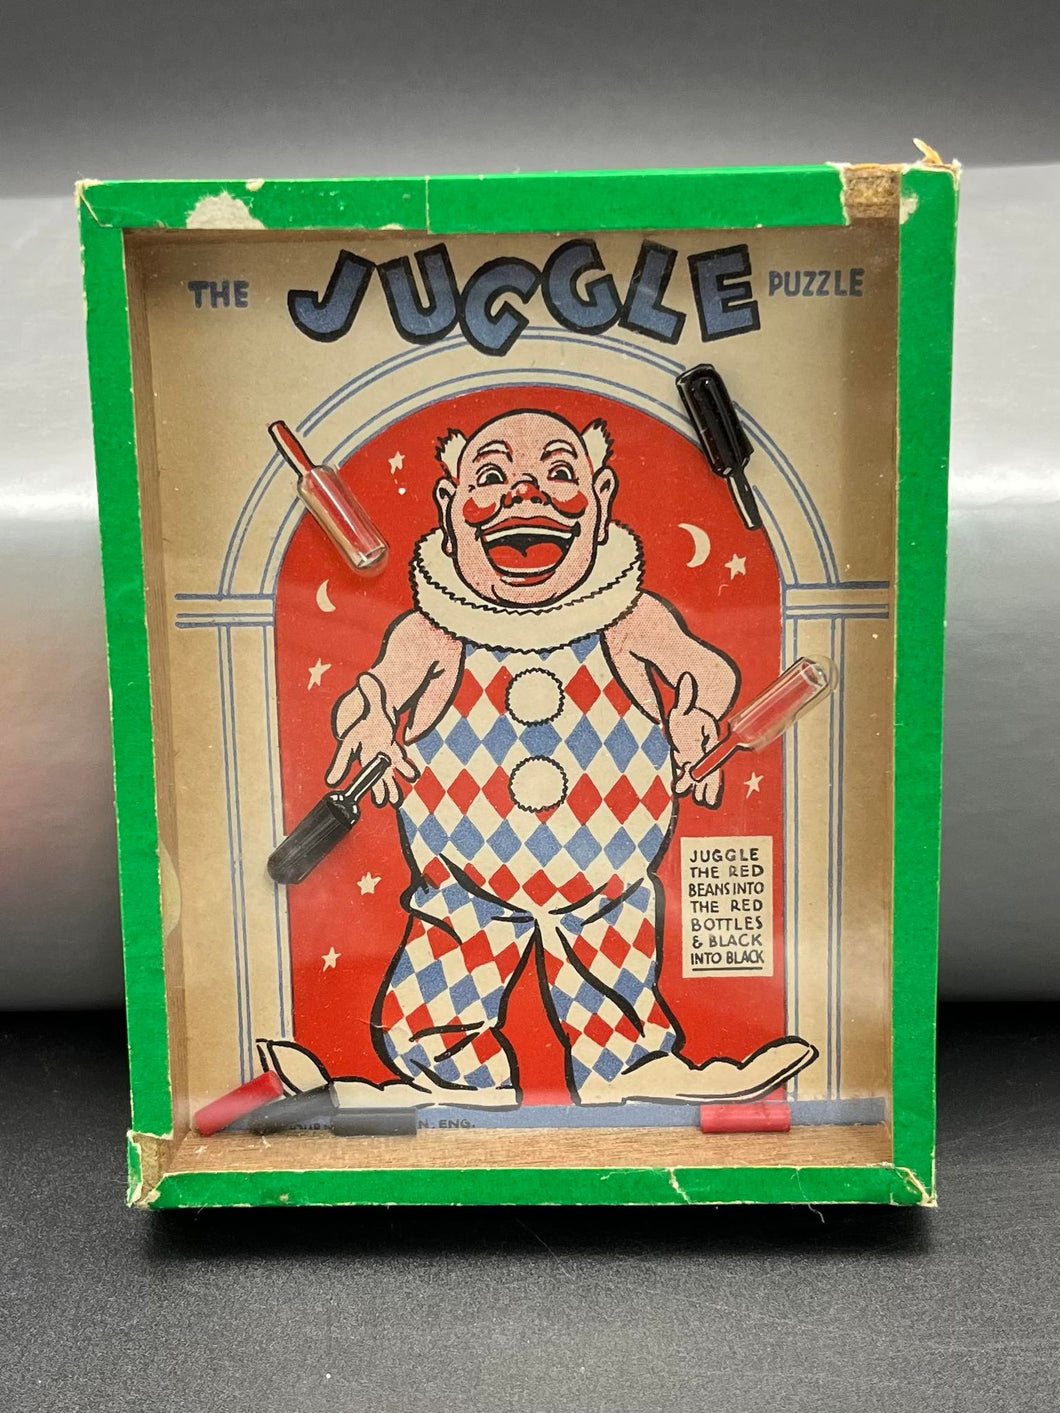 Vintage 'The Juggle Puzzle'